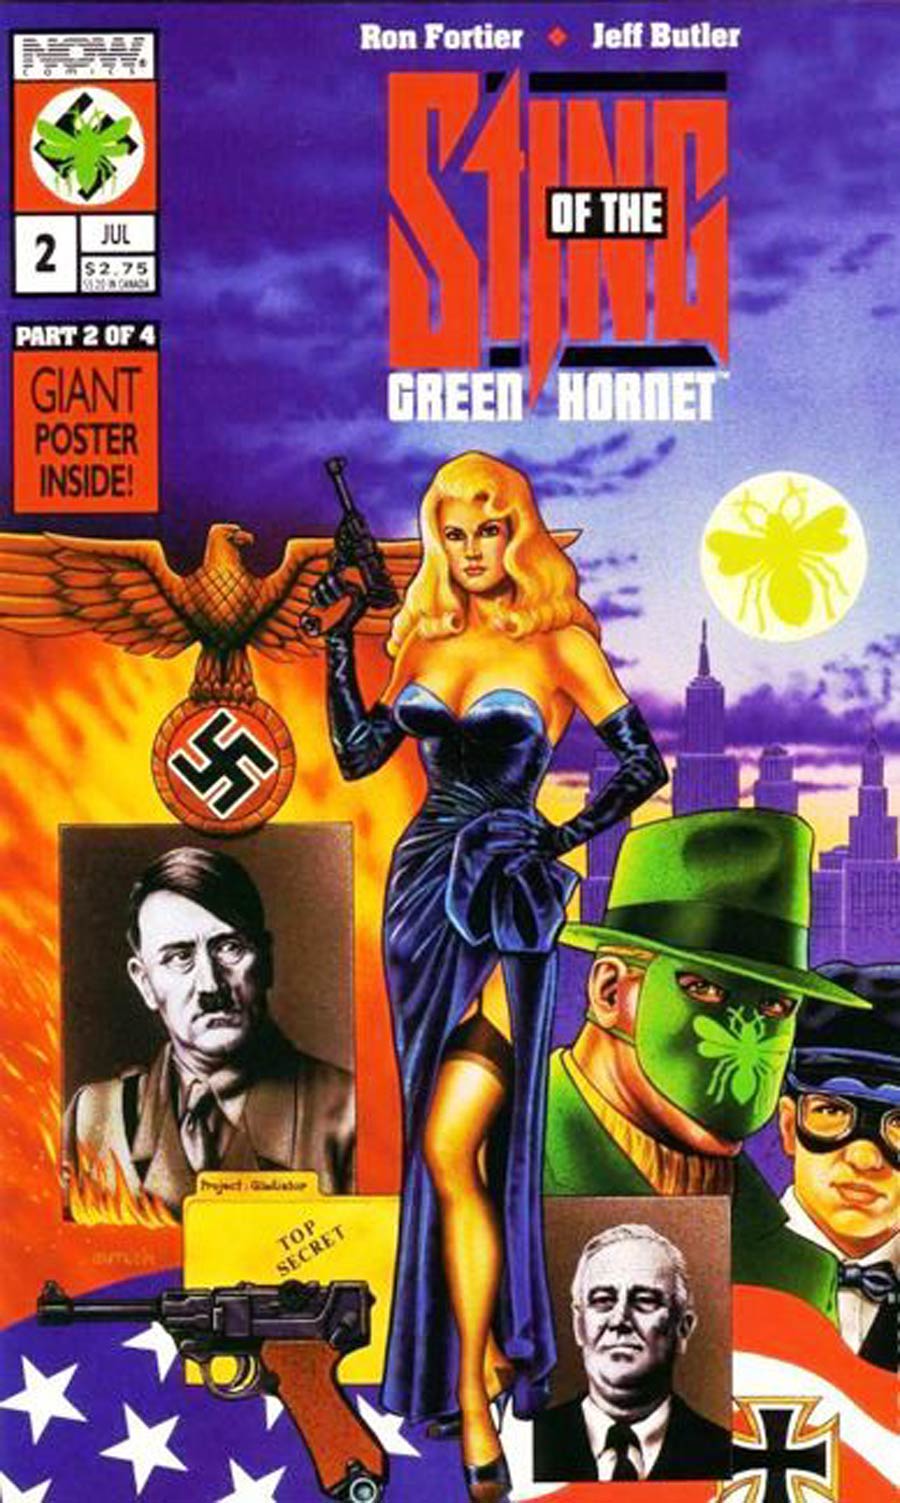 Sting Of The Green Hornet #2 Cover C Collectors Edition No Polybag